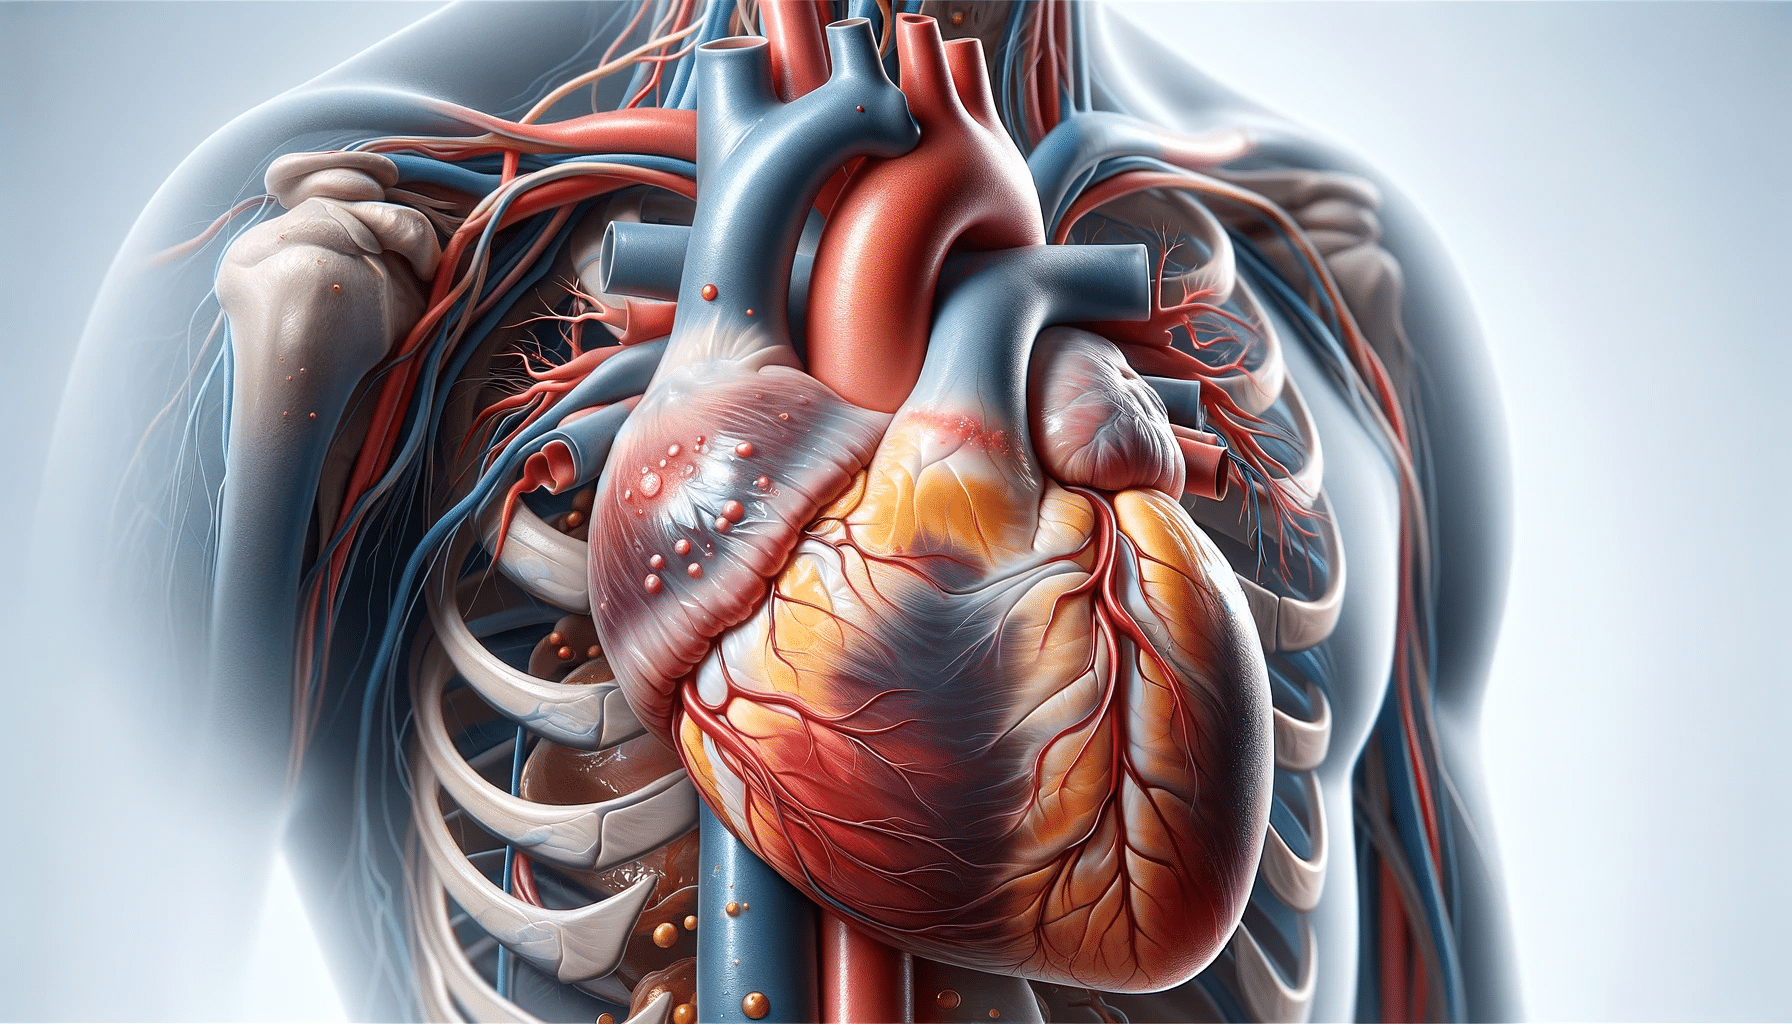 A highly realistic horizontal illustration of a human heart with Miopericarditis. The heart should be anatomically accurate, displaying clear signs of.